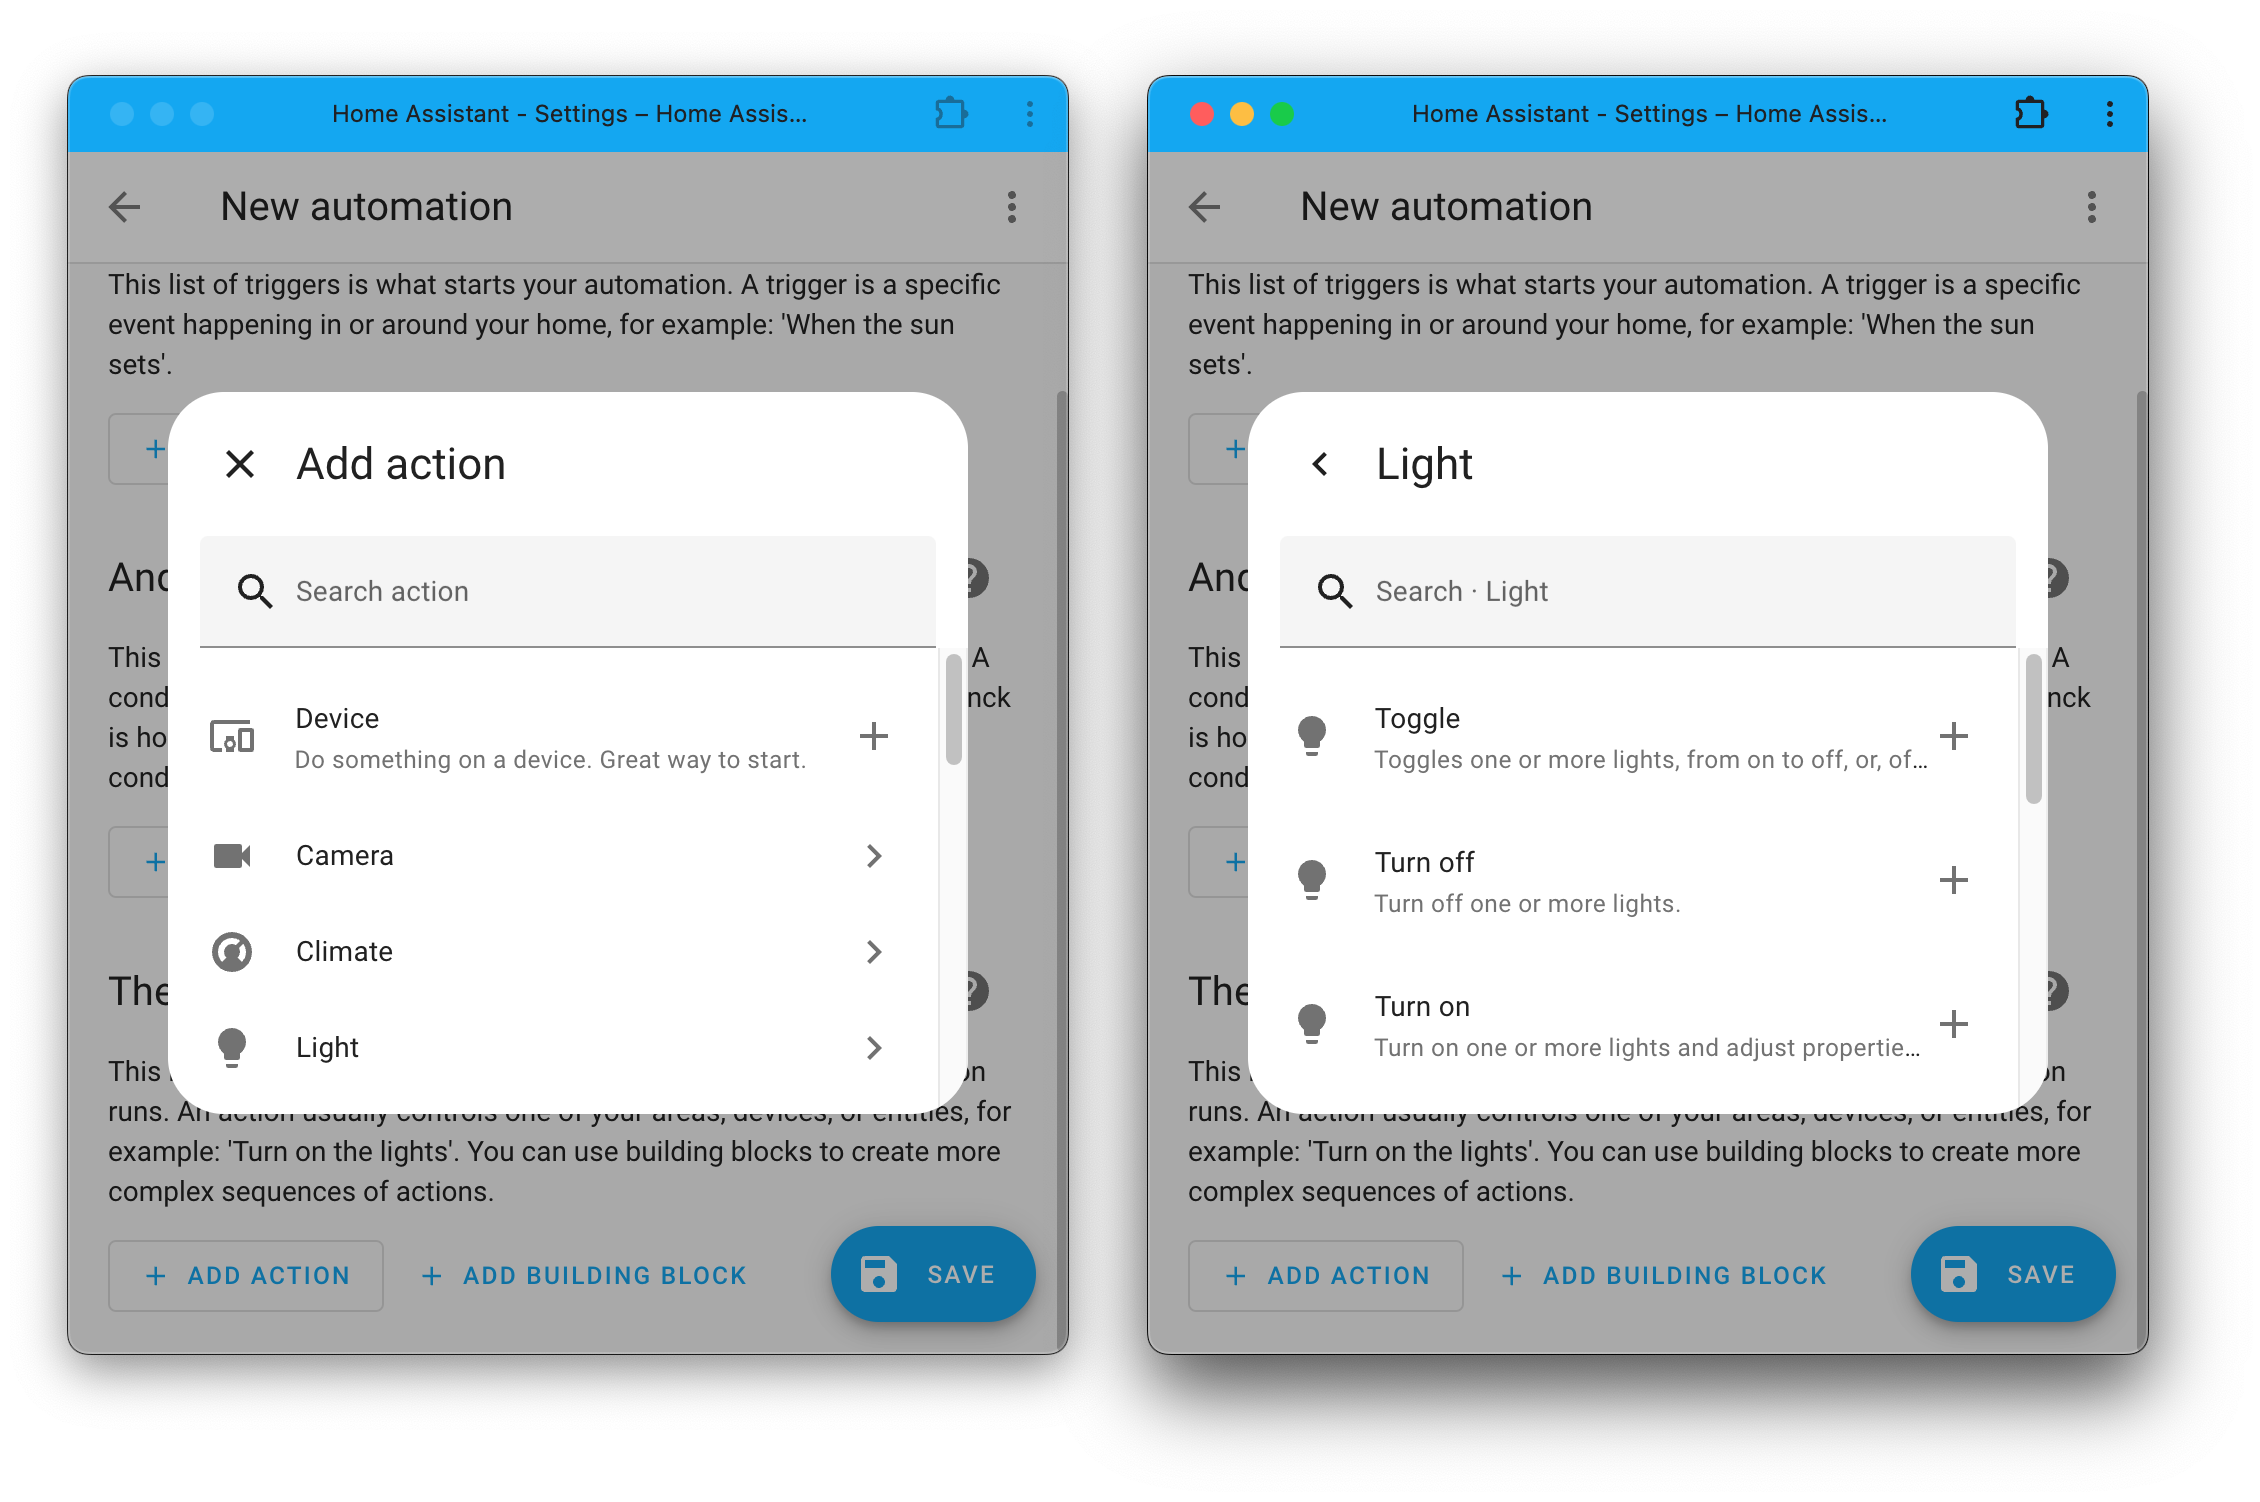 Screenshot showing the new add action dialog, which now shows all possible actions, including services.